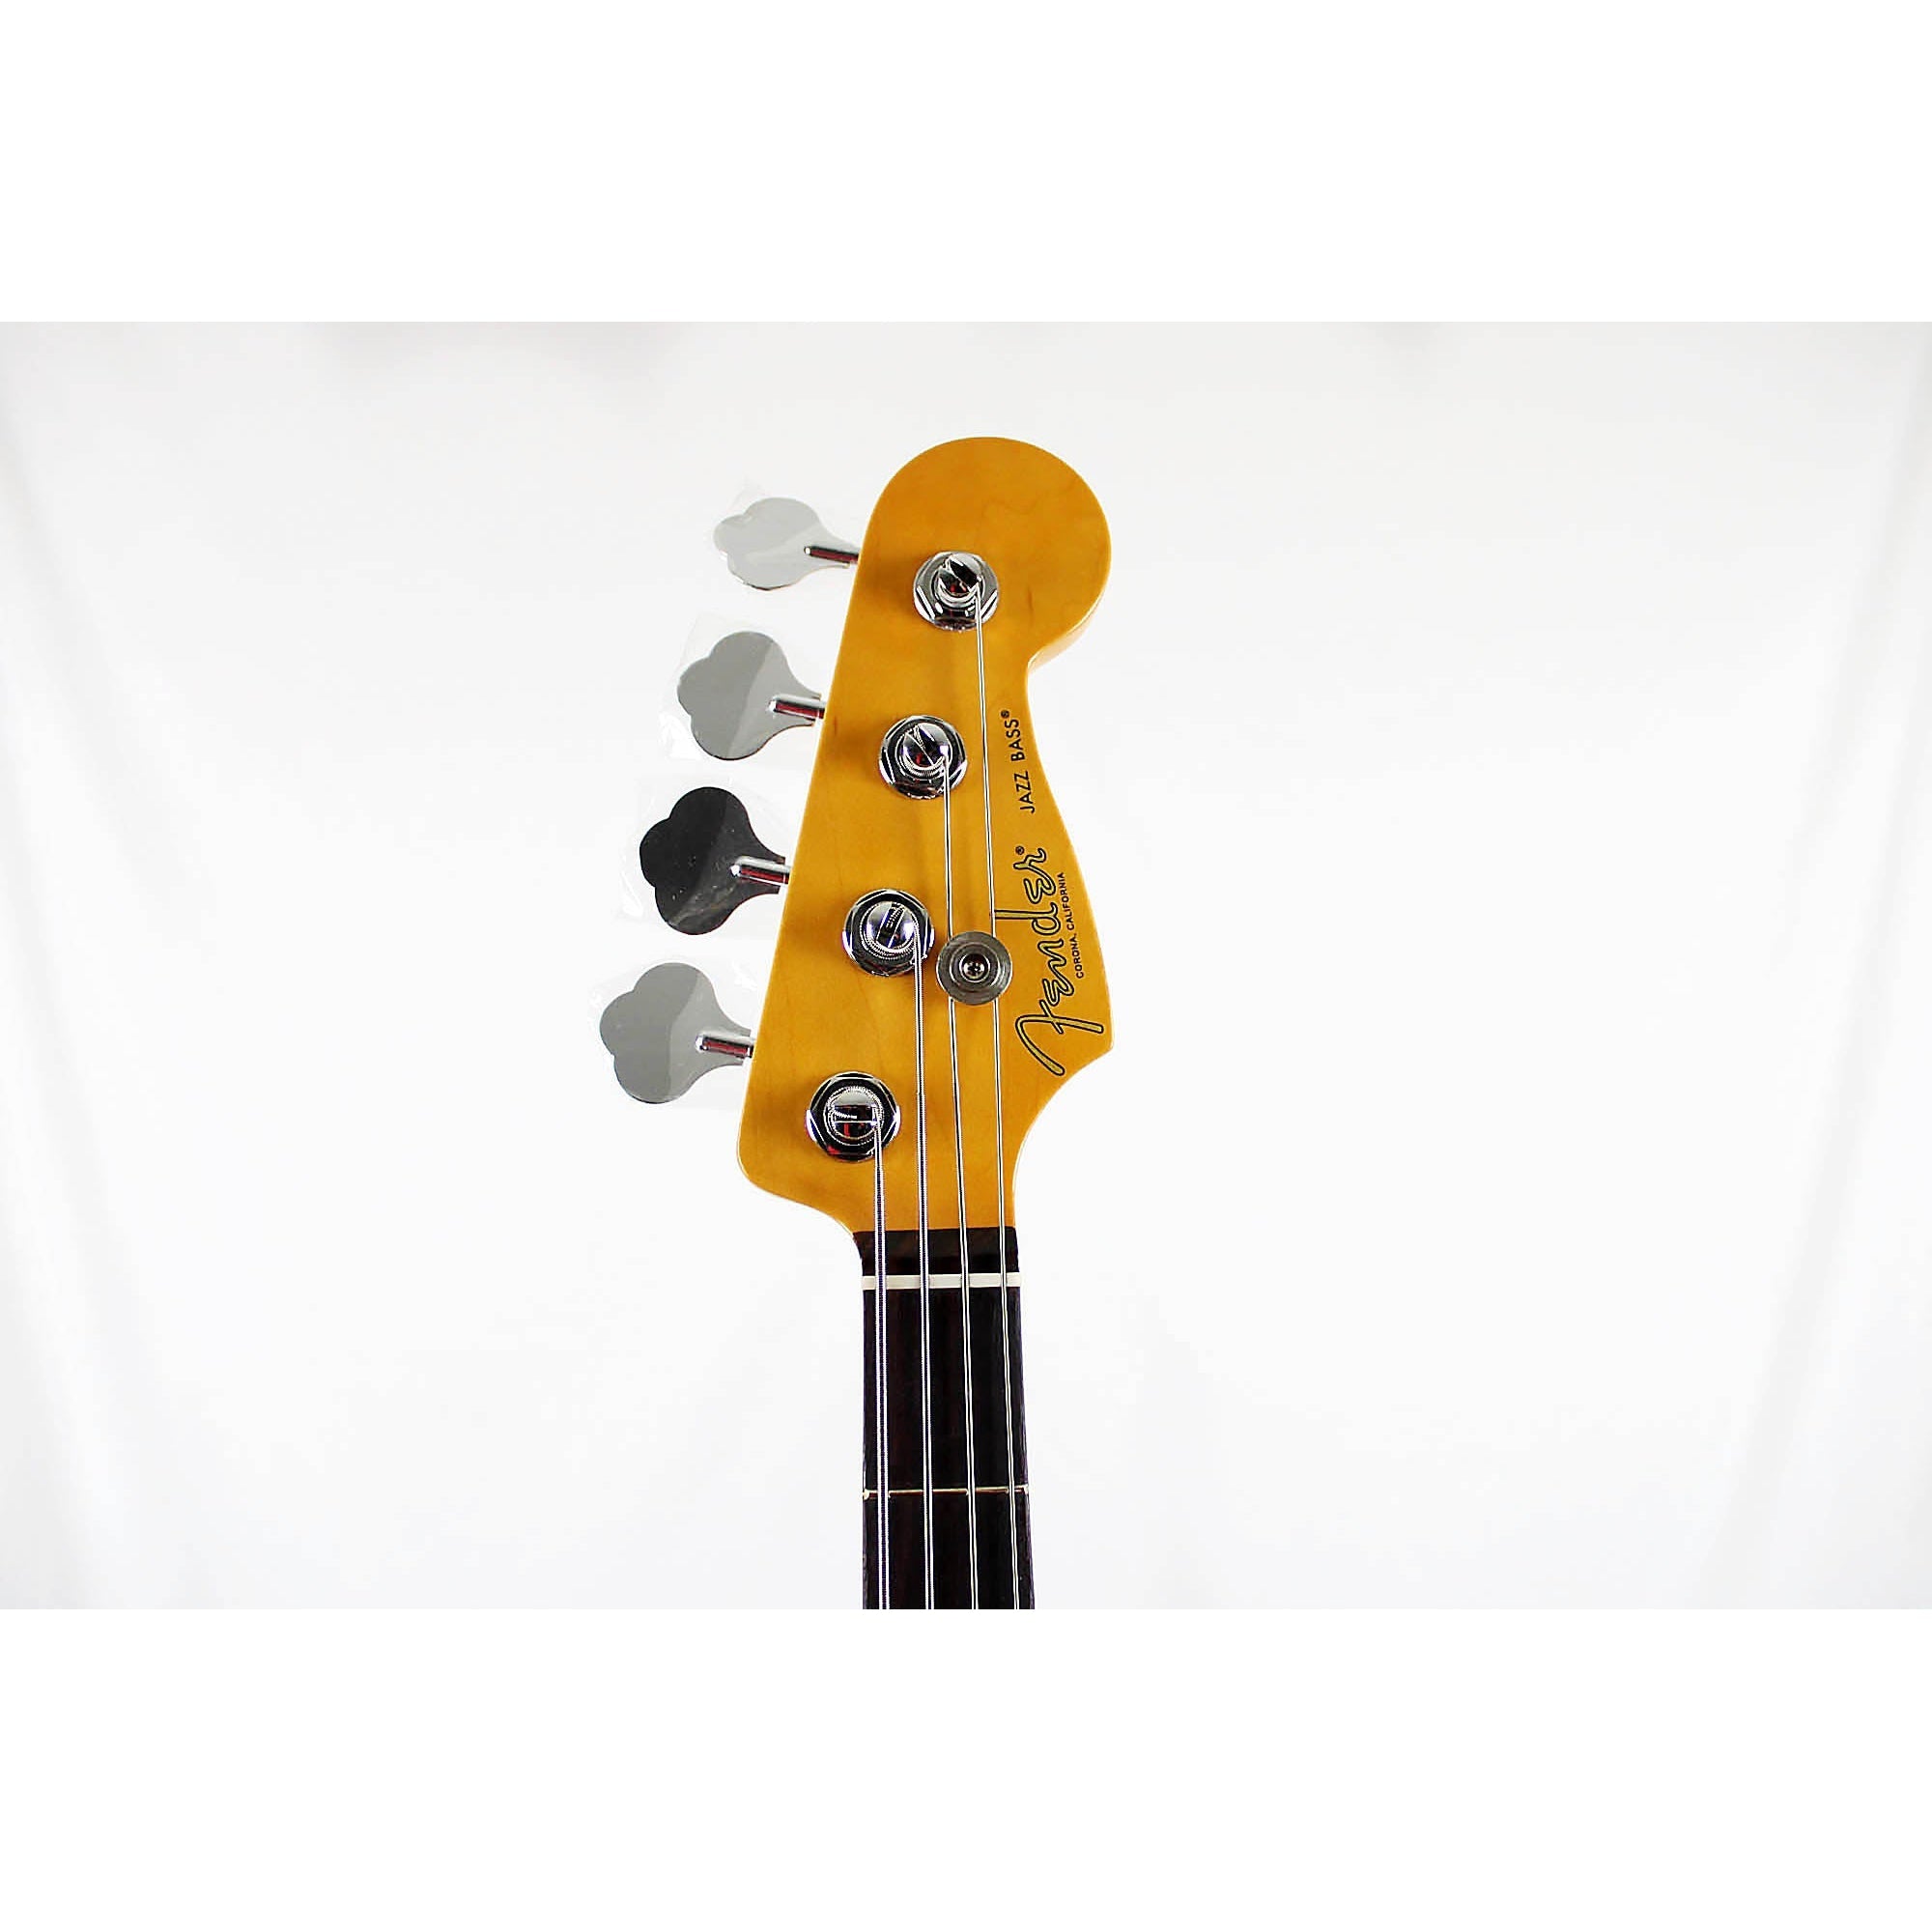 Fender American Professional II Jazz Bass - Miami Blue with